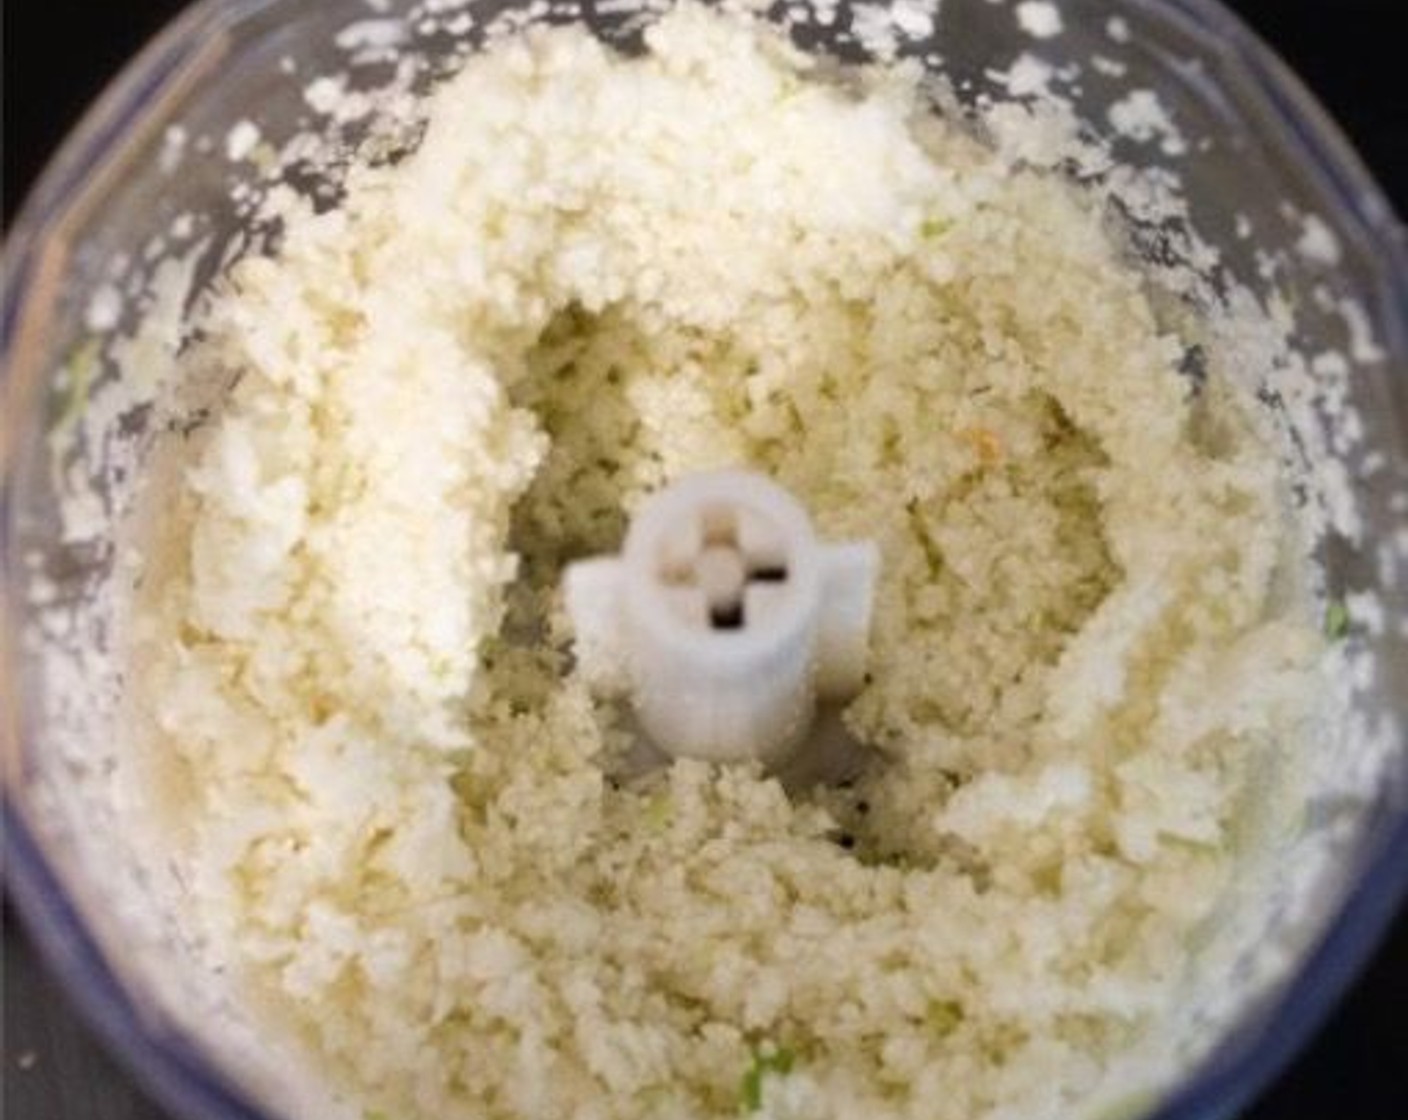 step 1 In a food processor, pulse the Cauliflower (1/2 head) until it reaches your desired “rice” consistency. Alternatively, you can grate the cauliflower with a grater.